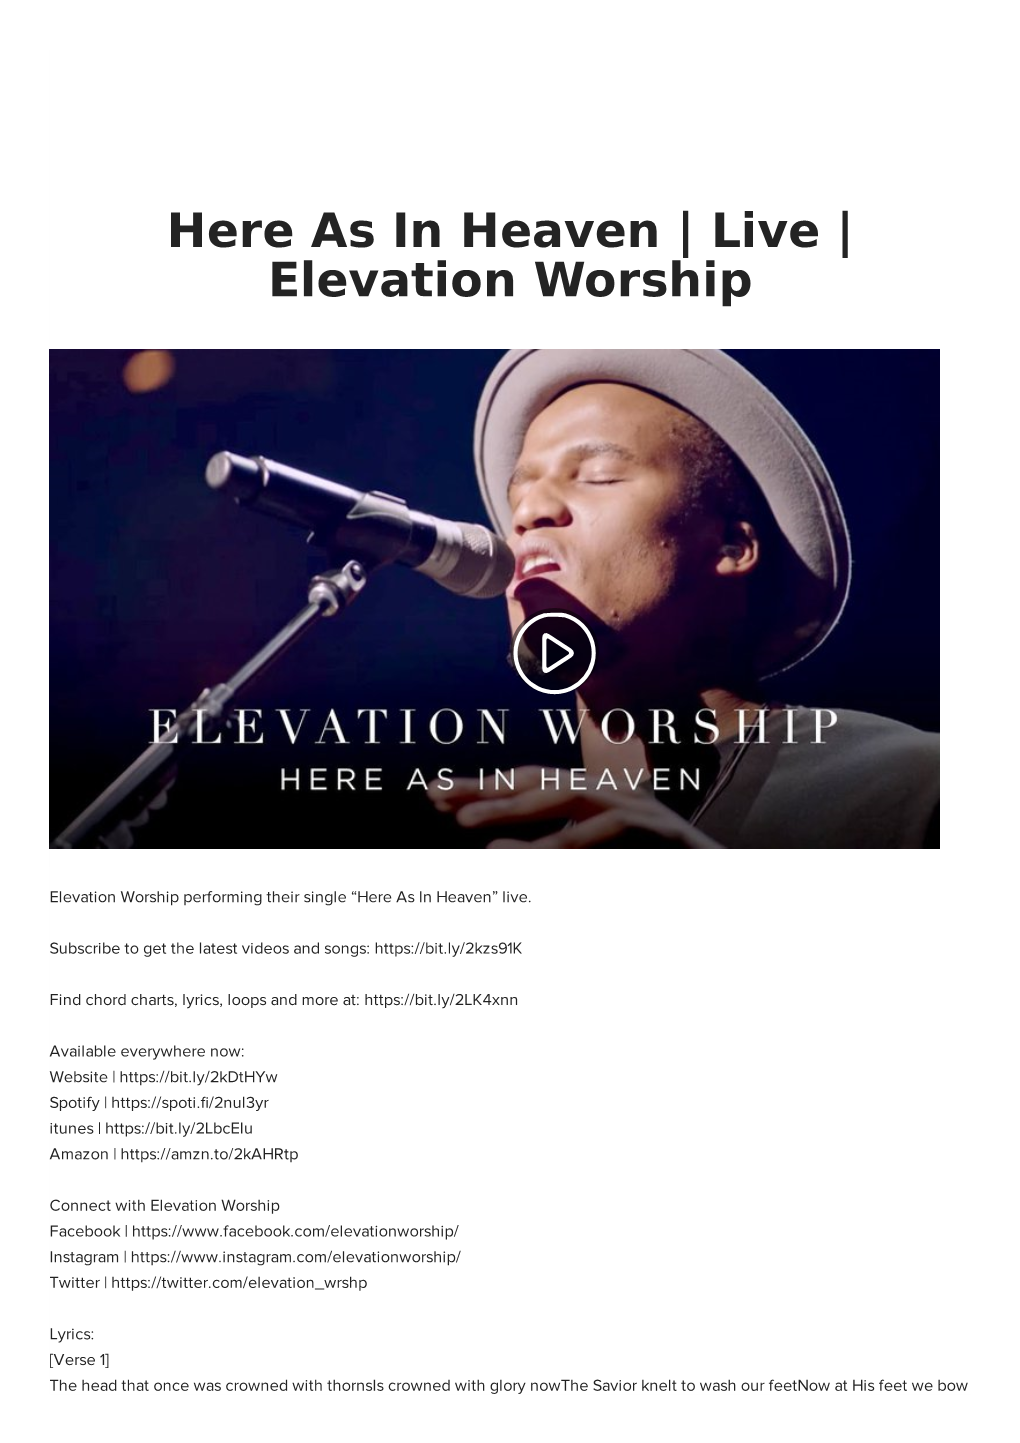 Here As in Heaven | Live | Elevation Worship